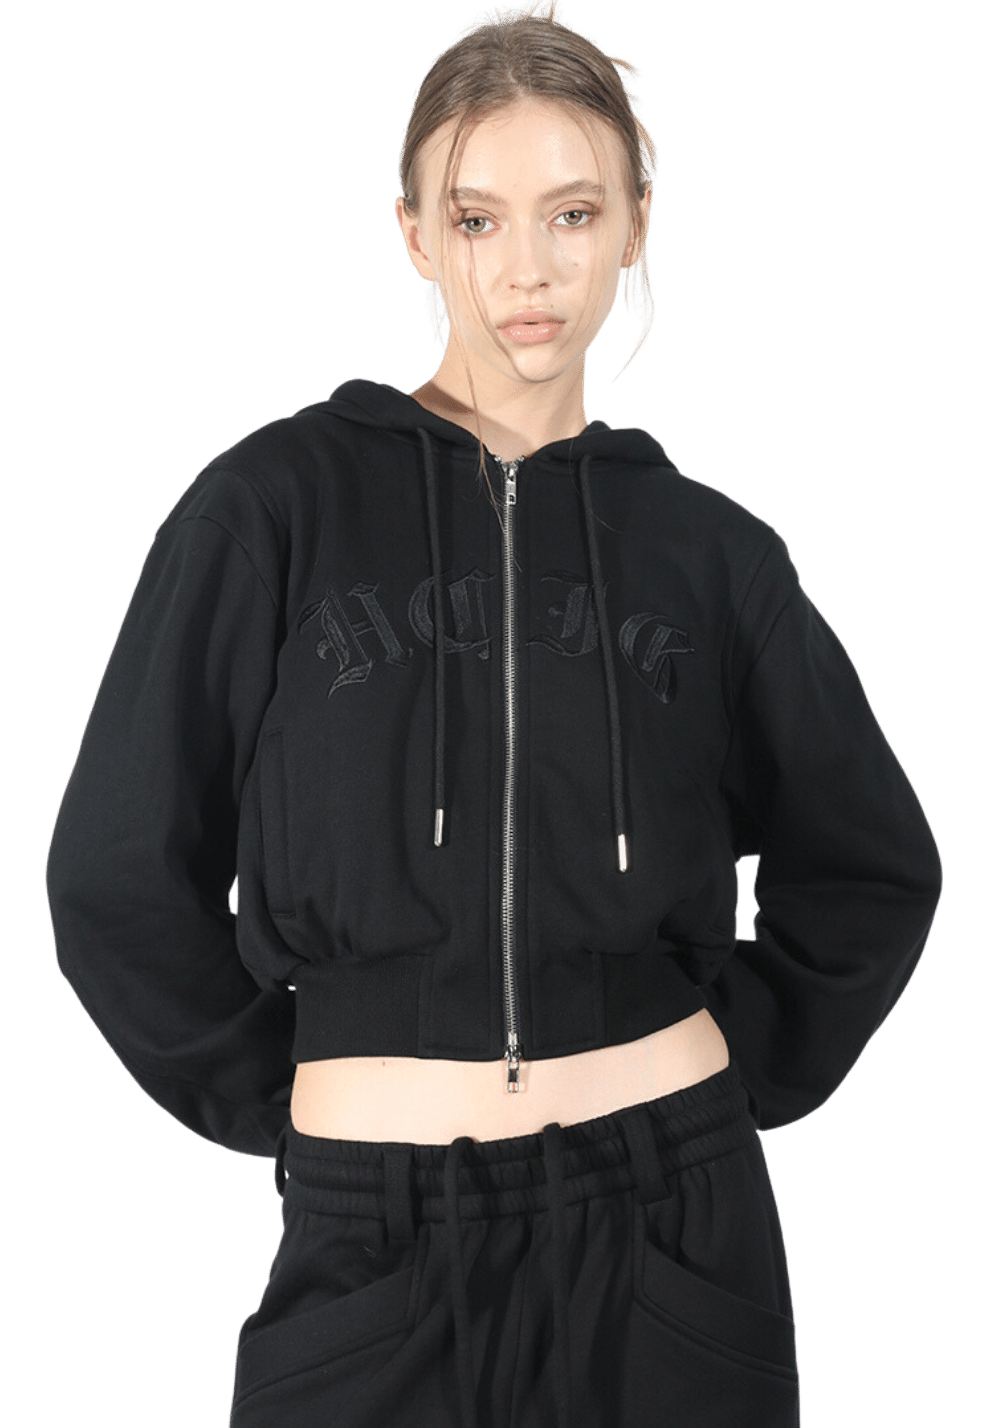 Street Style Embroidered Zip Up Hoodie - PSYLOS 1, Street Style Embroidered Zip Up Hoodie, Hoodie, HARSH AND CRUEL, PSYLOS 1